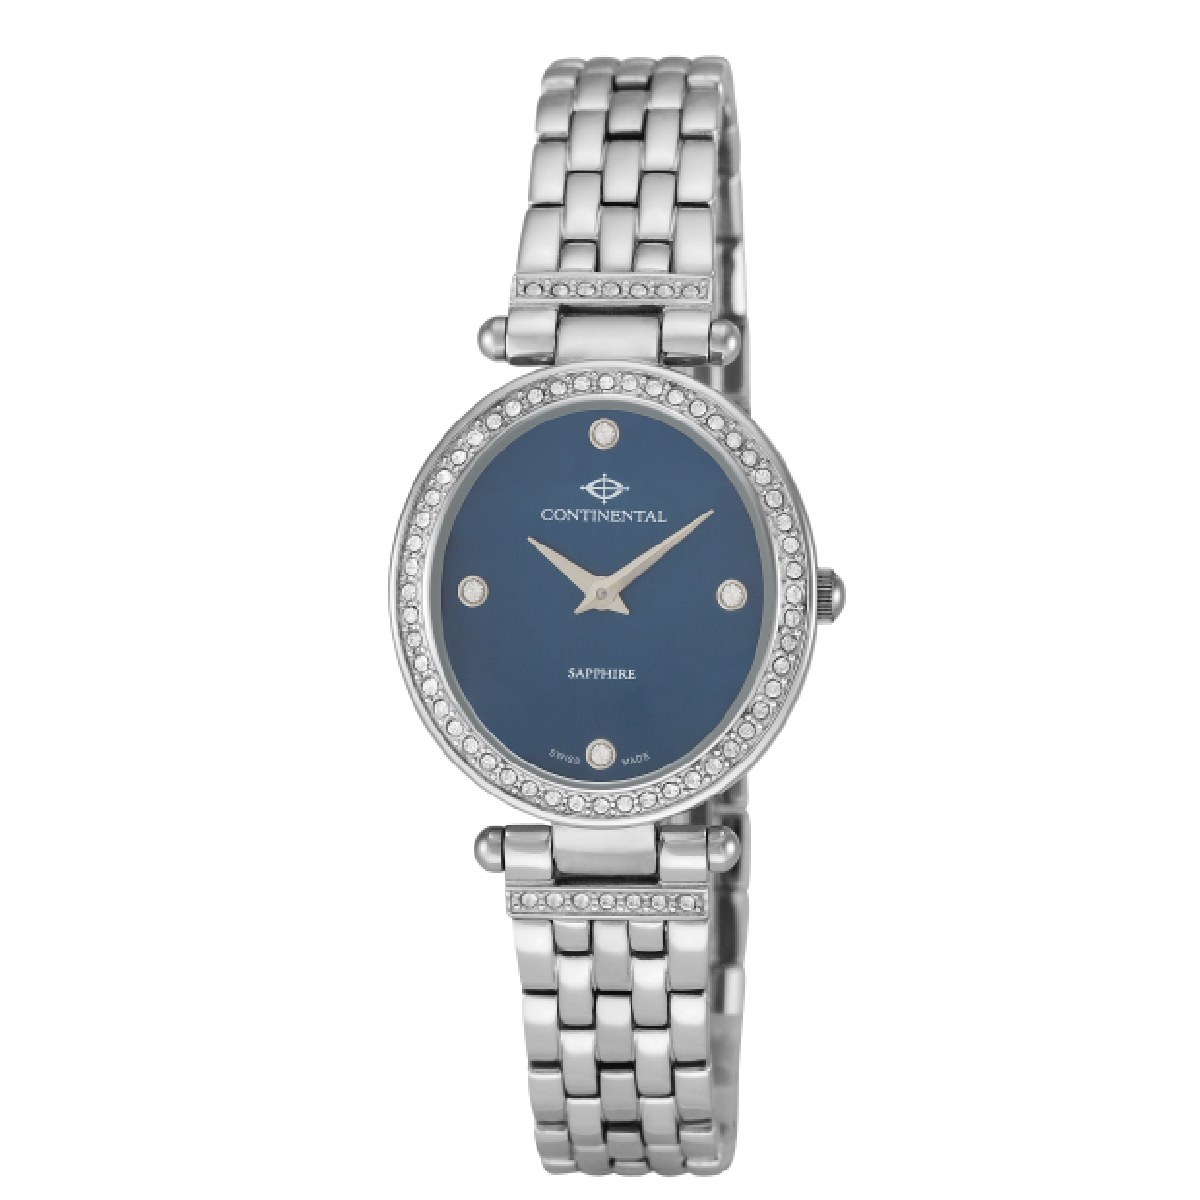 Continental Ladies Dress Watch 17003-LT101801 - front view